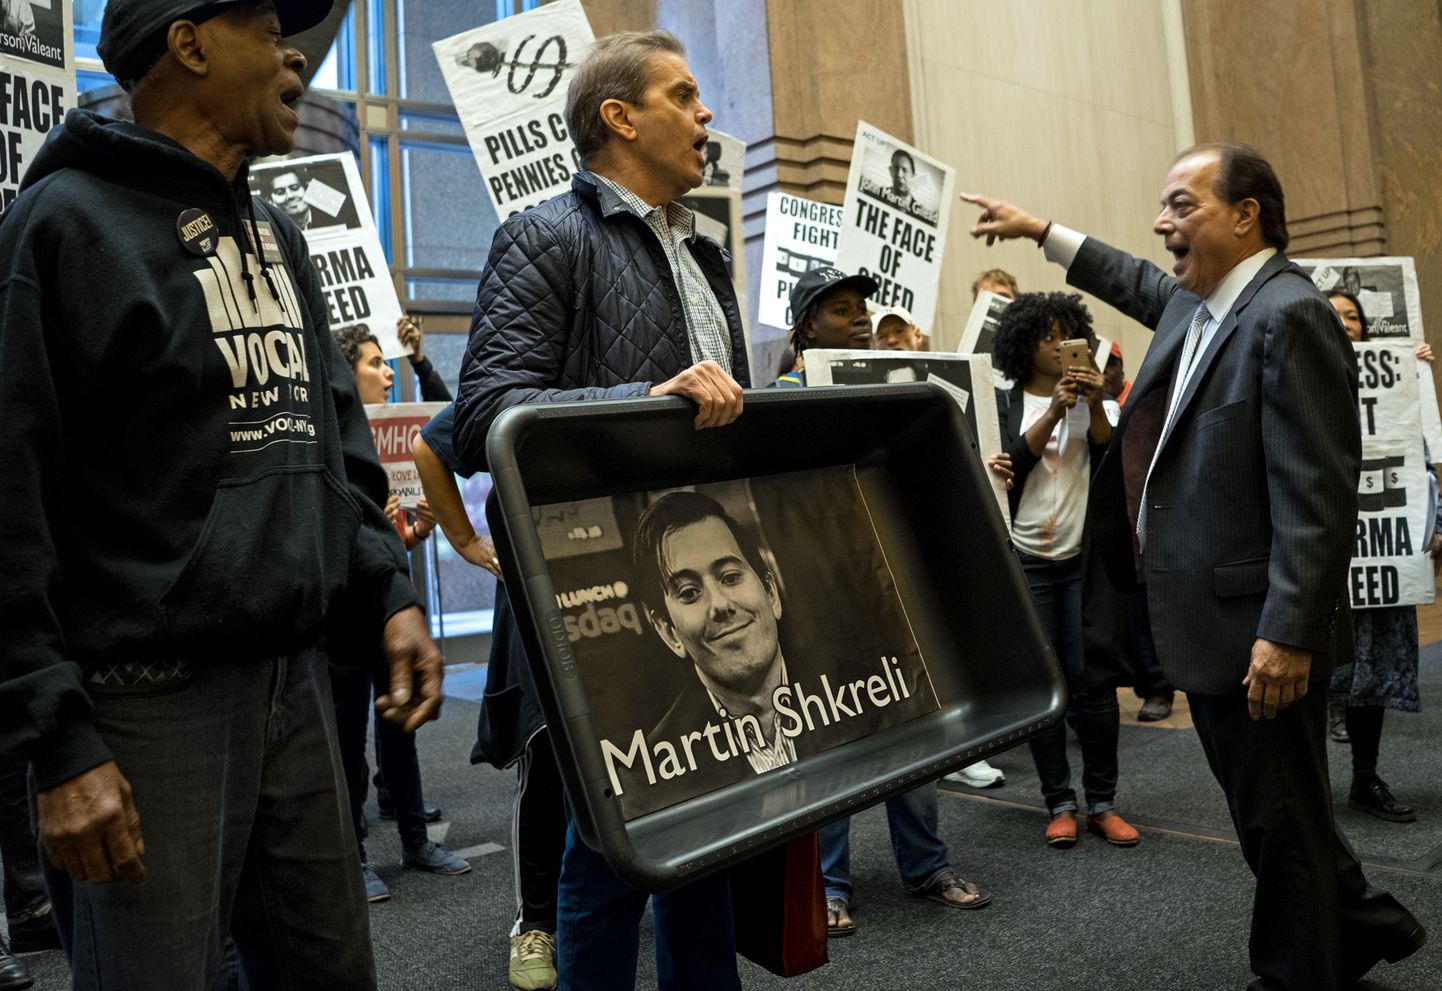 AIDSiaktvisitid elutähtsate ravimite hindade eest võitlemas. Kassi liivakastis on Martin Shkreli pilt. 

FILE - In this Thursday, Oct. 1, 2015, file photo, carrying an image of Turing Pharmaceuticals CEO Martin Shkreli in a makeshift cat litter pan, AIDS activists and others are asked to leave the lobby of 1177 6th Ave. in New York, during a protest highlighting pharmaceutical drug pricing. A Senate committee tasked with protecting seniors launched an investigation Wednesday, Nov. 4, 2015, into drug price hikes by Turing, Valeant Pharmaceuticals, Retrophin Inc. and Rodelis Therapeutics, responding to public anxiety over rising prices for critical medicines. (AP Photo/Craig Ruttle, File)